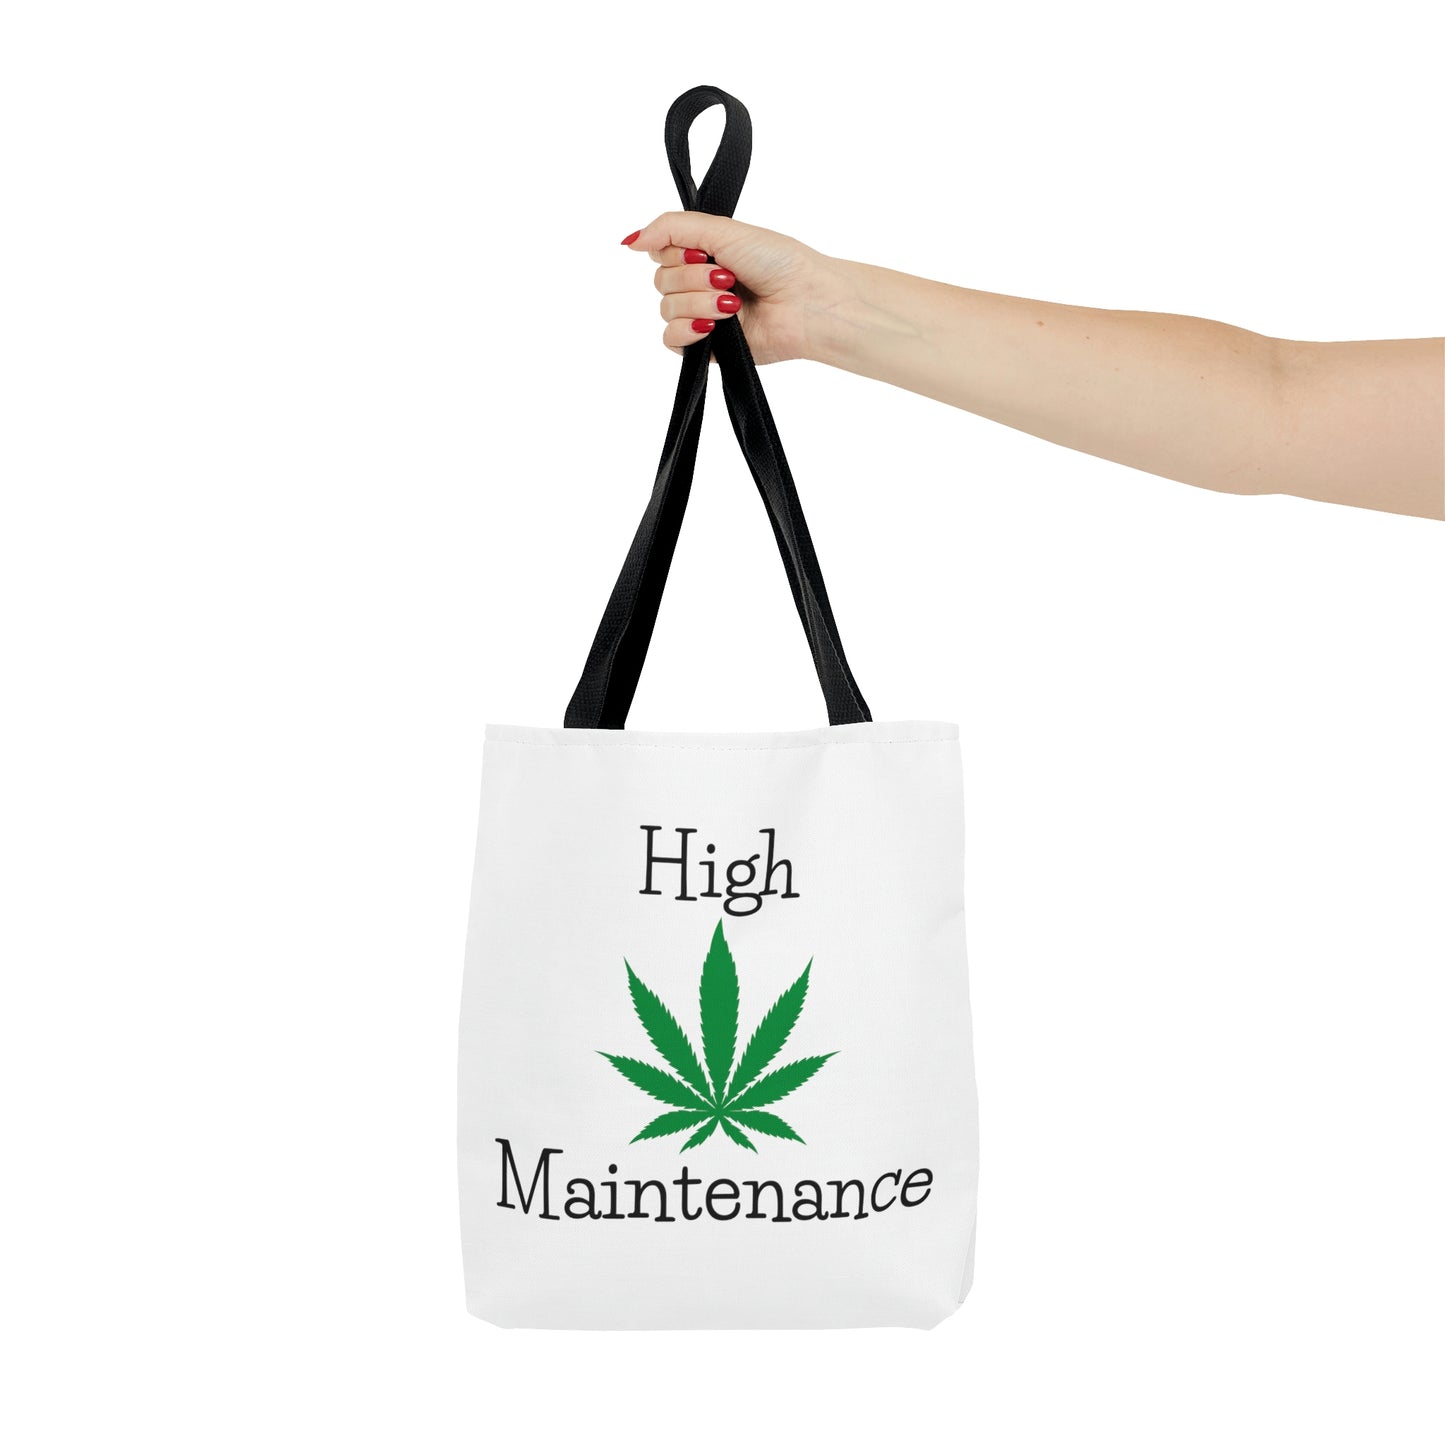 An outstretched hand is holding the High Maintenance Weed Tote Bag with cannabis leaf